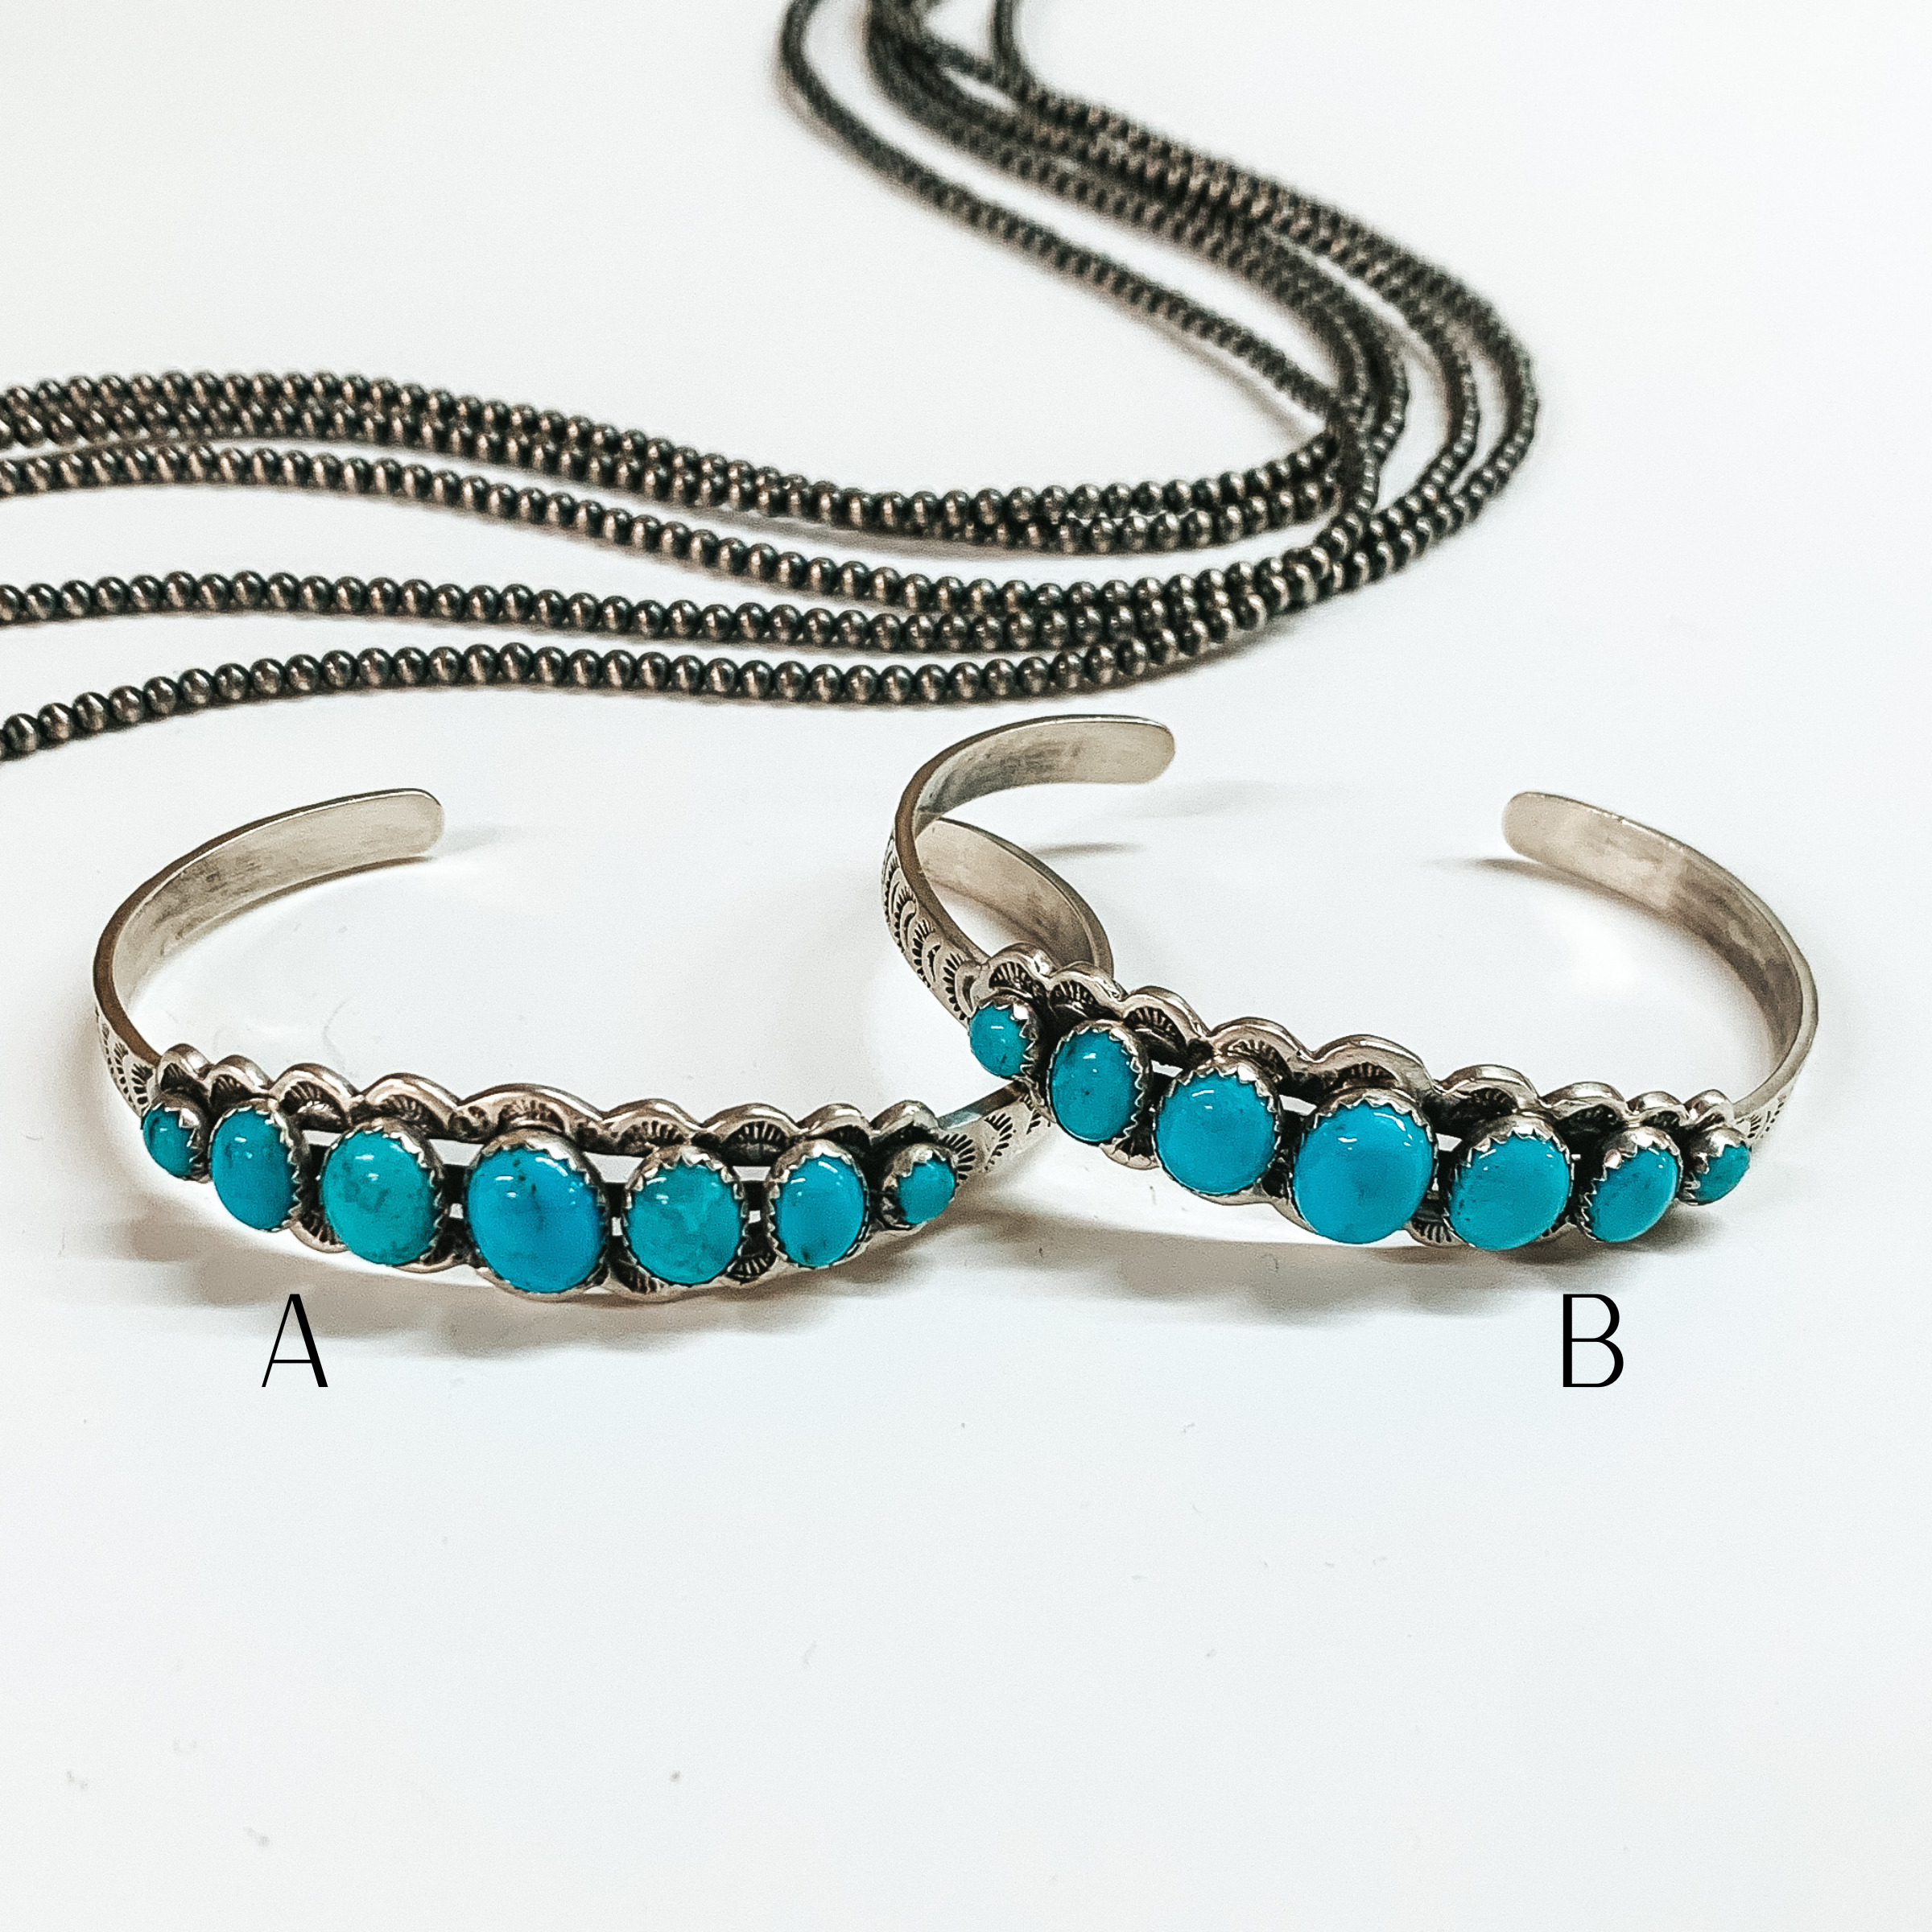 Russell Sam | Navajo Handmade Sterling Silver Cuff Bracelet with Seven Turquoise Stones - Giddy Up Glamour Boutique